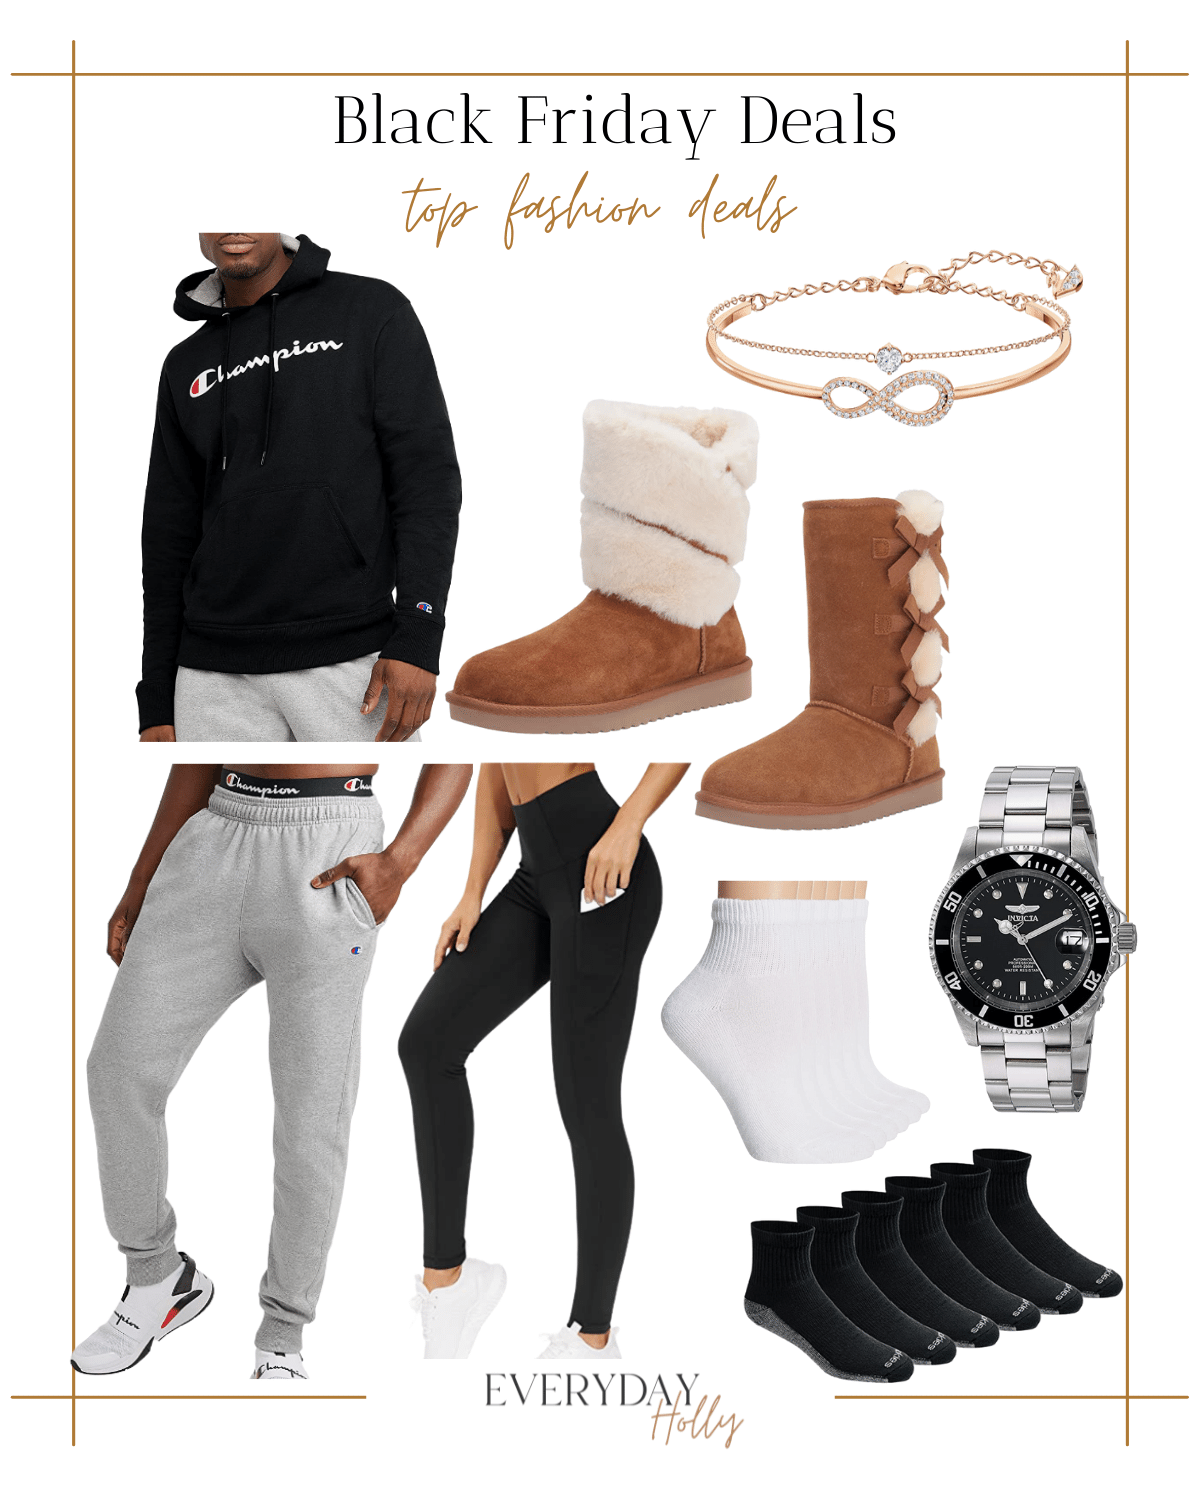 amazon black friday deals, champion sweatshirt, ugg boots with fur wrapped around top, ugg boot with bows down the side, champion sweatpants, black leggings with pocket, womens socks, invicta watch, mens socks 